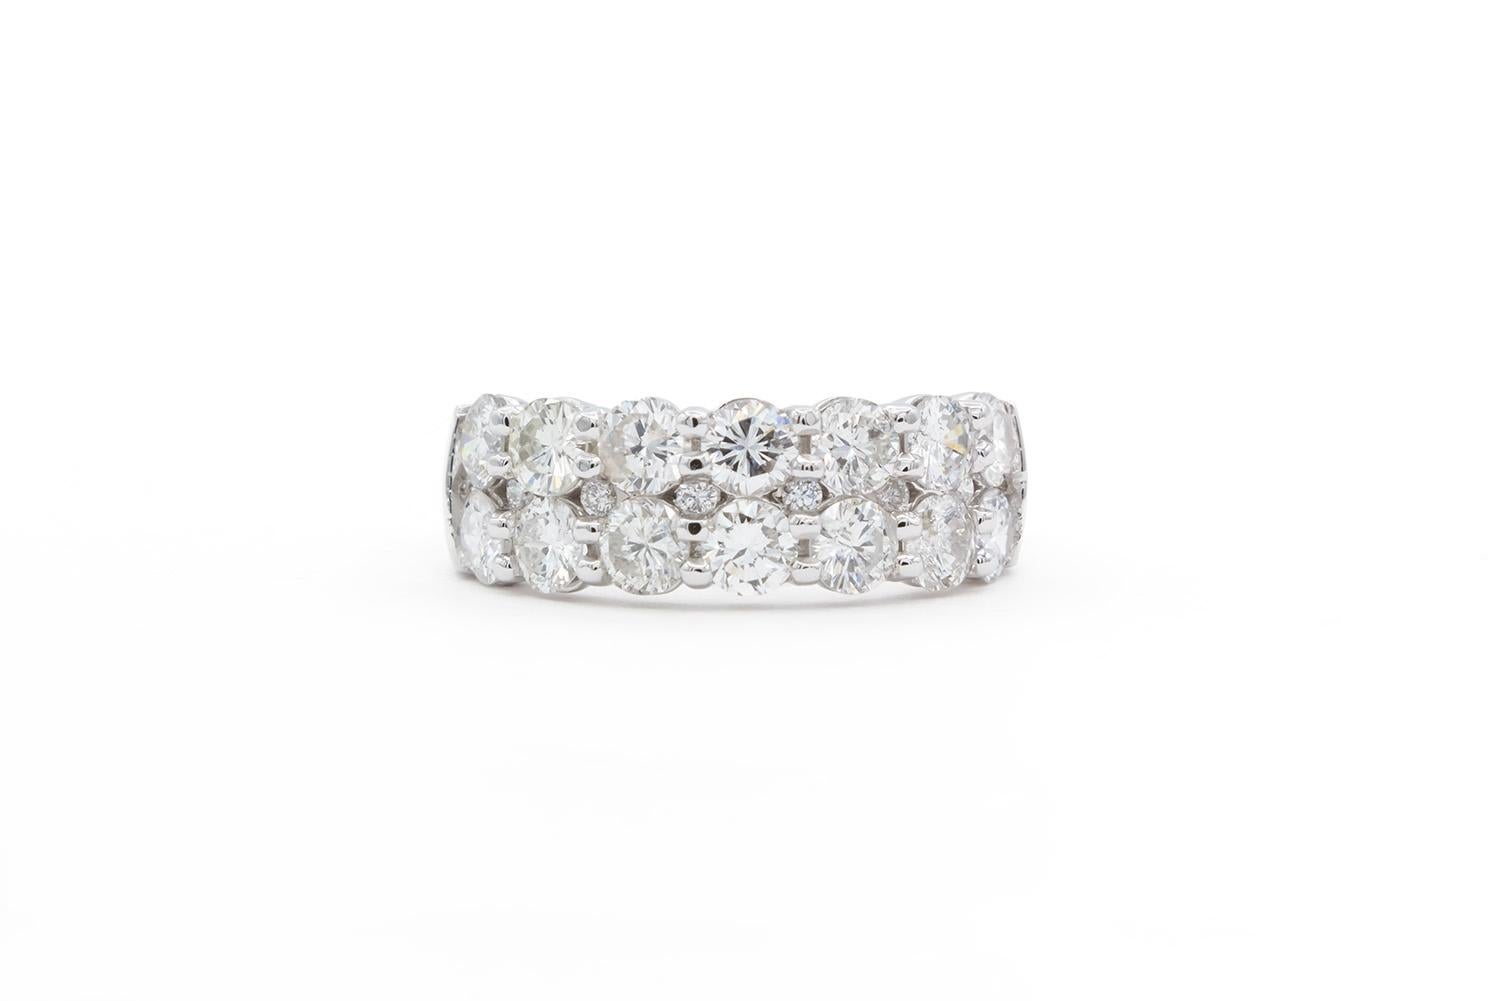 We are pleased to offer this Brand New 14k White Gold & Diamond 2 Row Shared Setting Fashion Ring. This is not your typical two row band, it actually has smaller hidden diamonds in between the larger diamonds for added bling! It features 2.26ctw